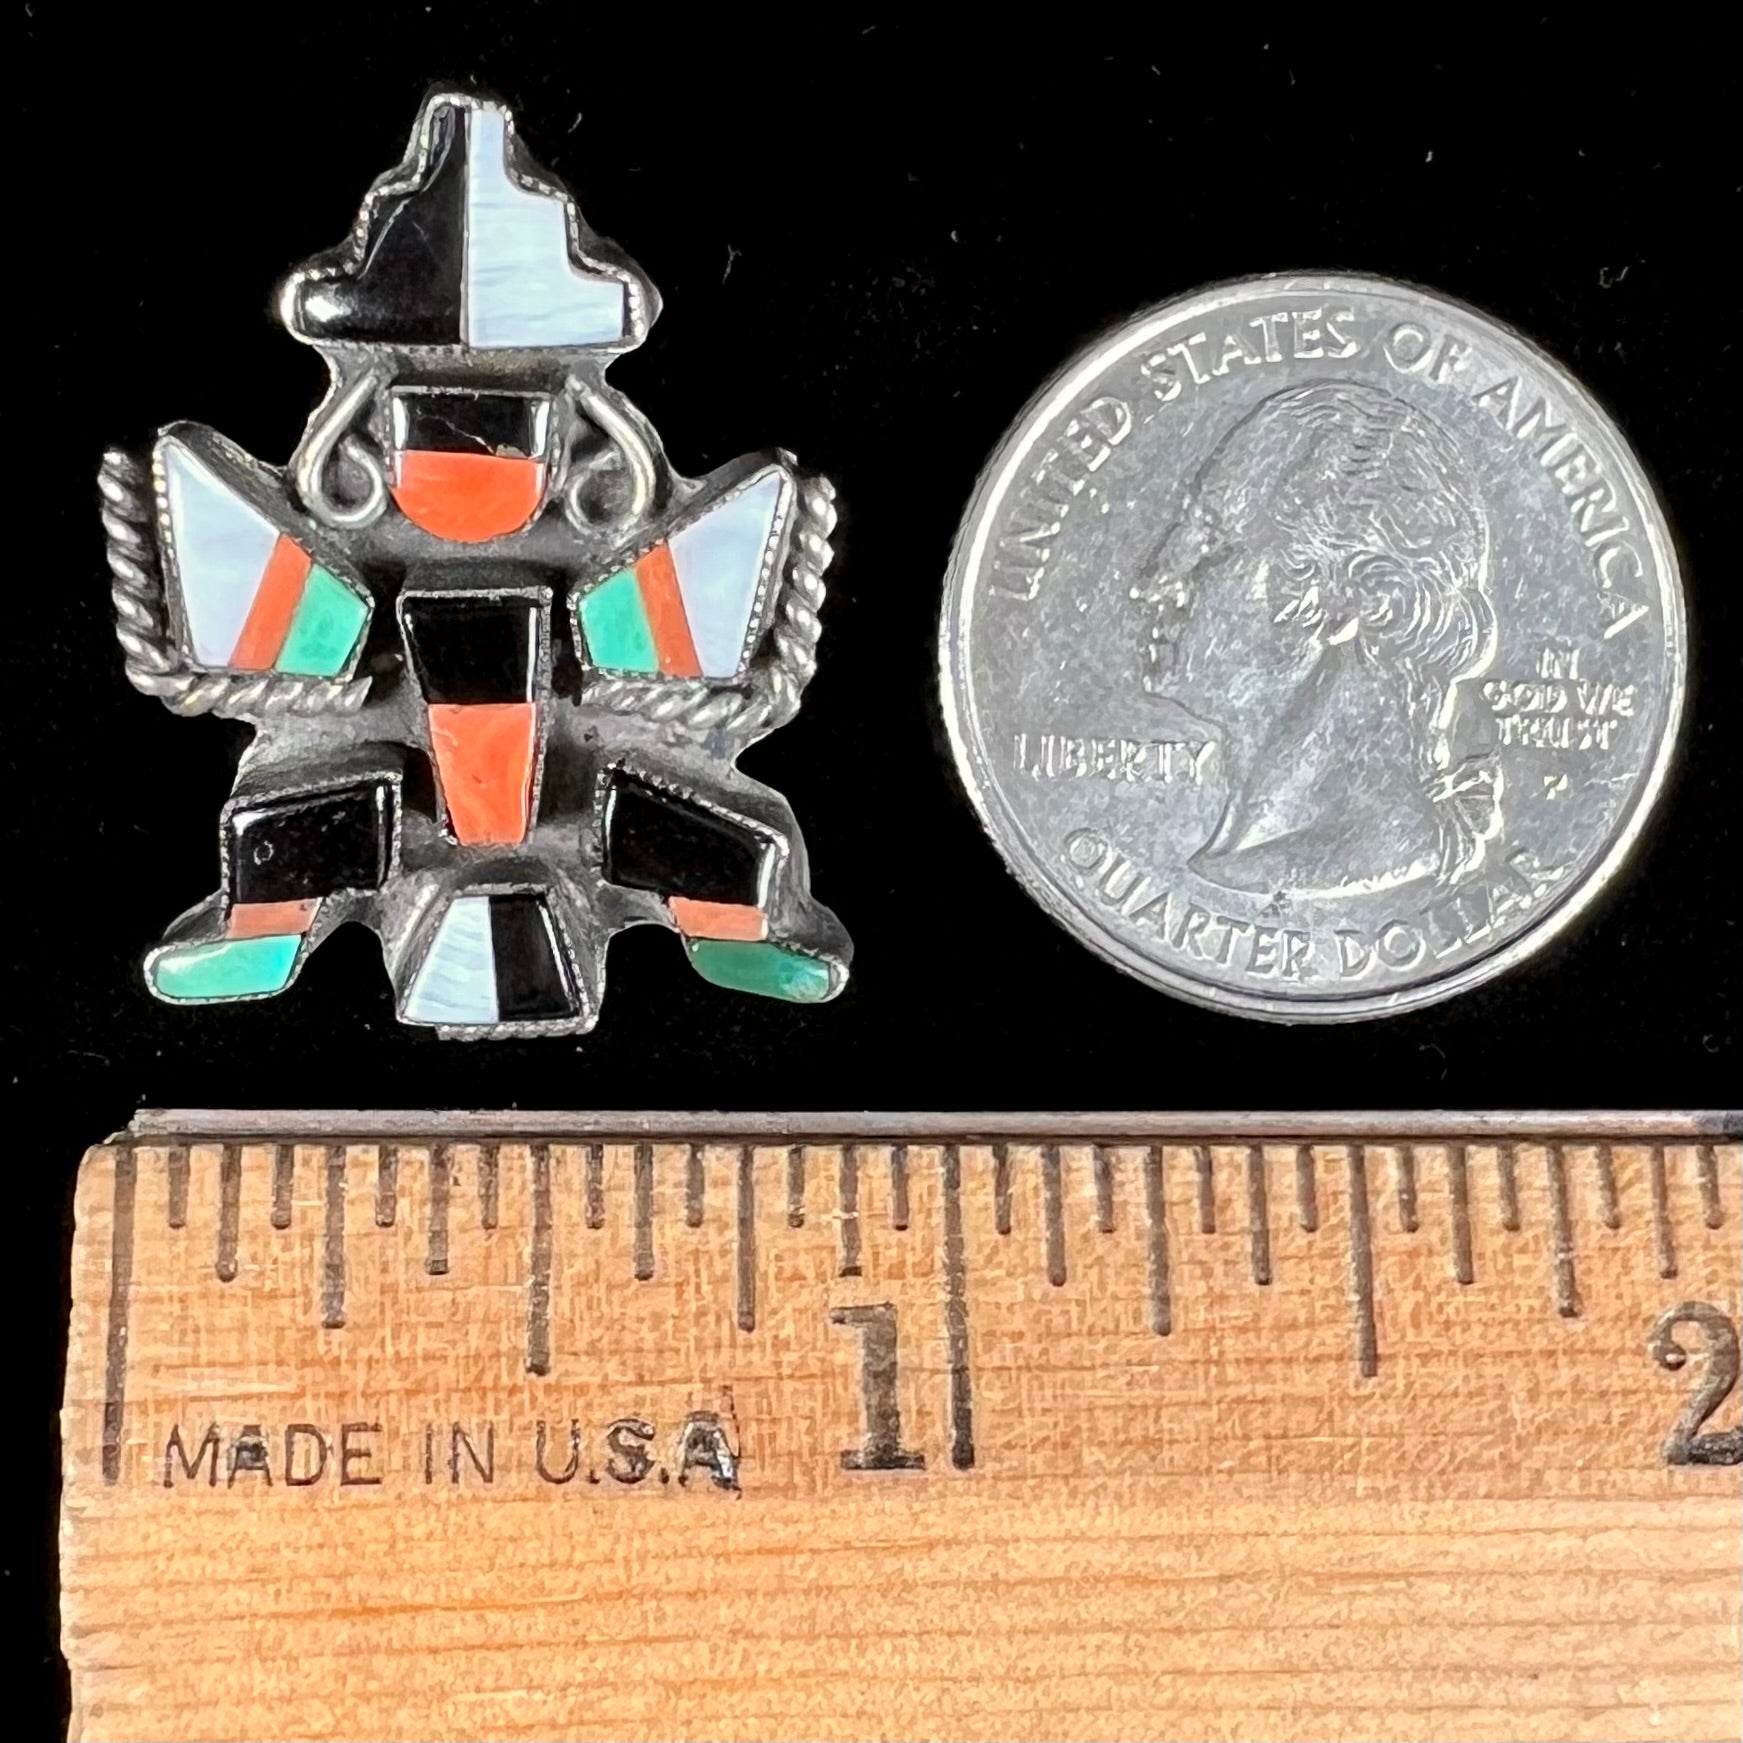 A sterling silver brooch depicting a Zuni Indian knifewing dancer, inlaid with jet, turquoise, coral, and mother of pearl.